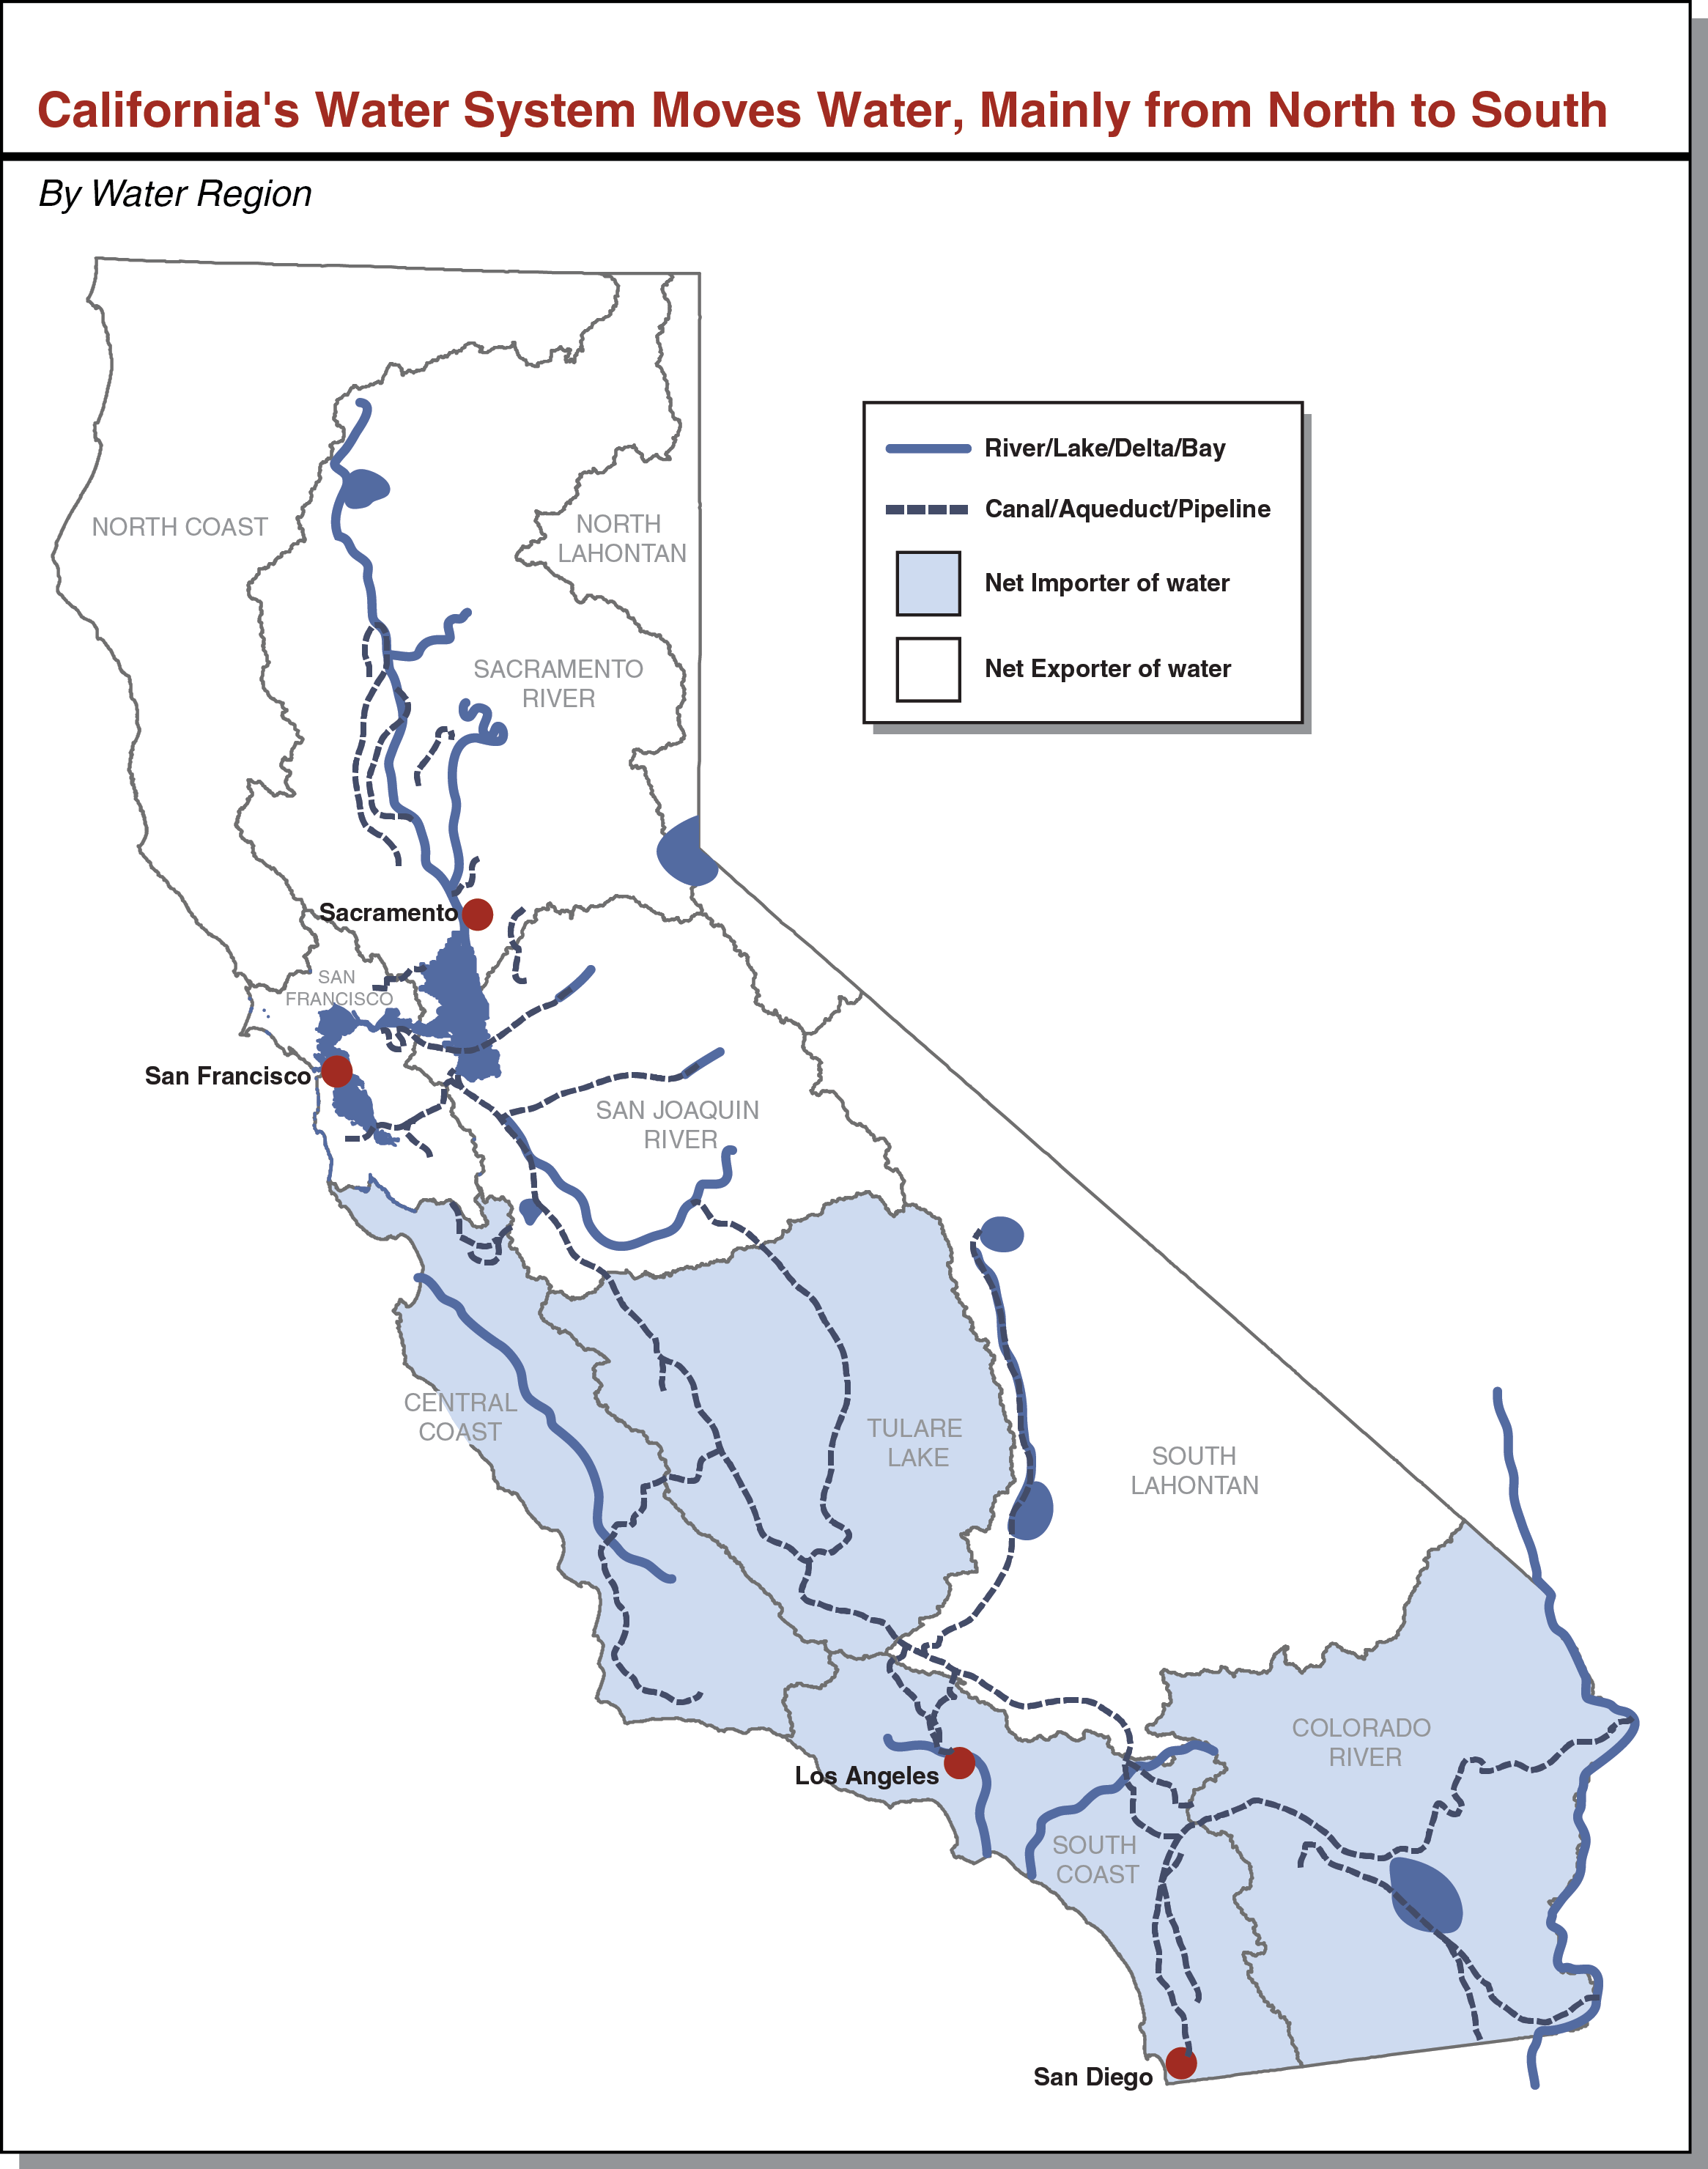 California's Water System Moves Water, Mainly from North to South